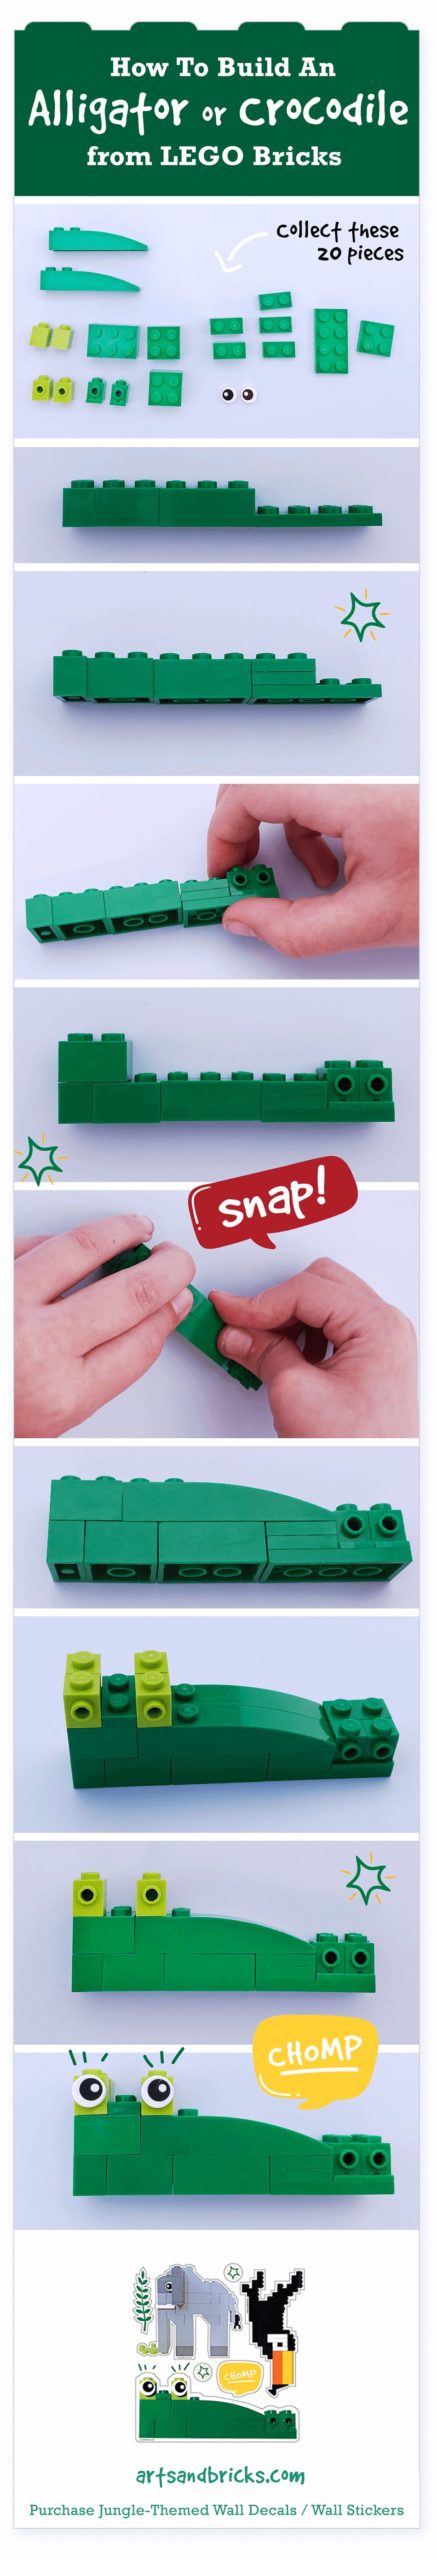 How to build an alligator or crocodile from Lego bricks, building instructions